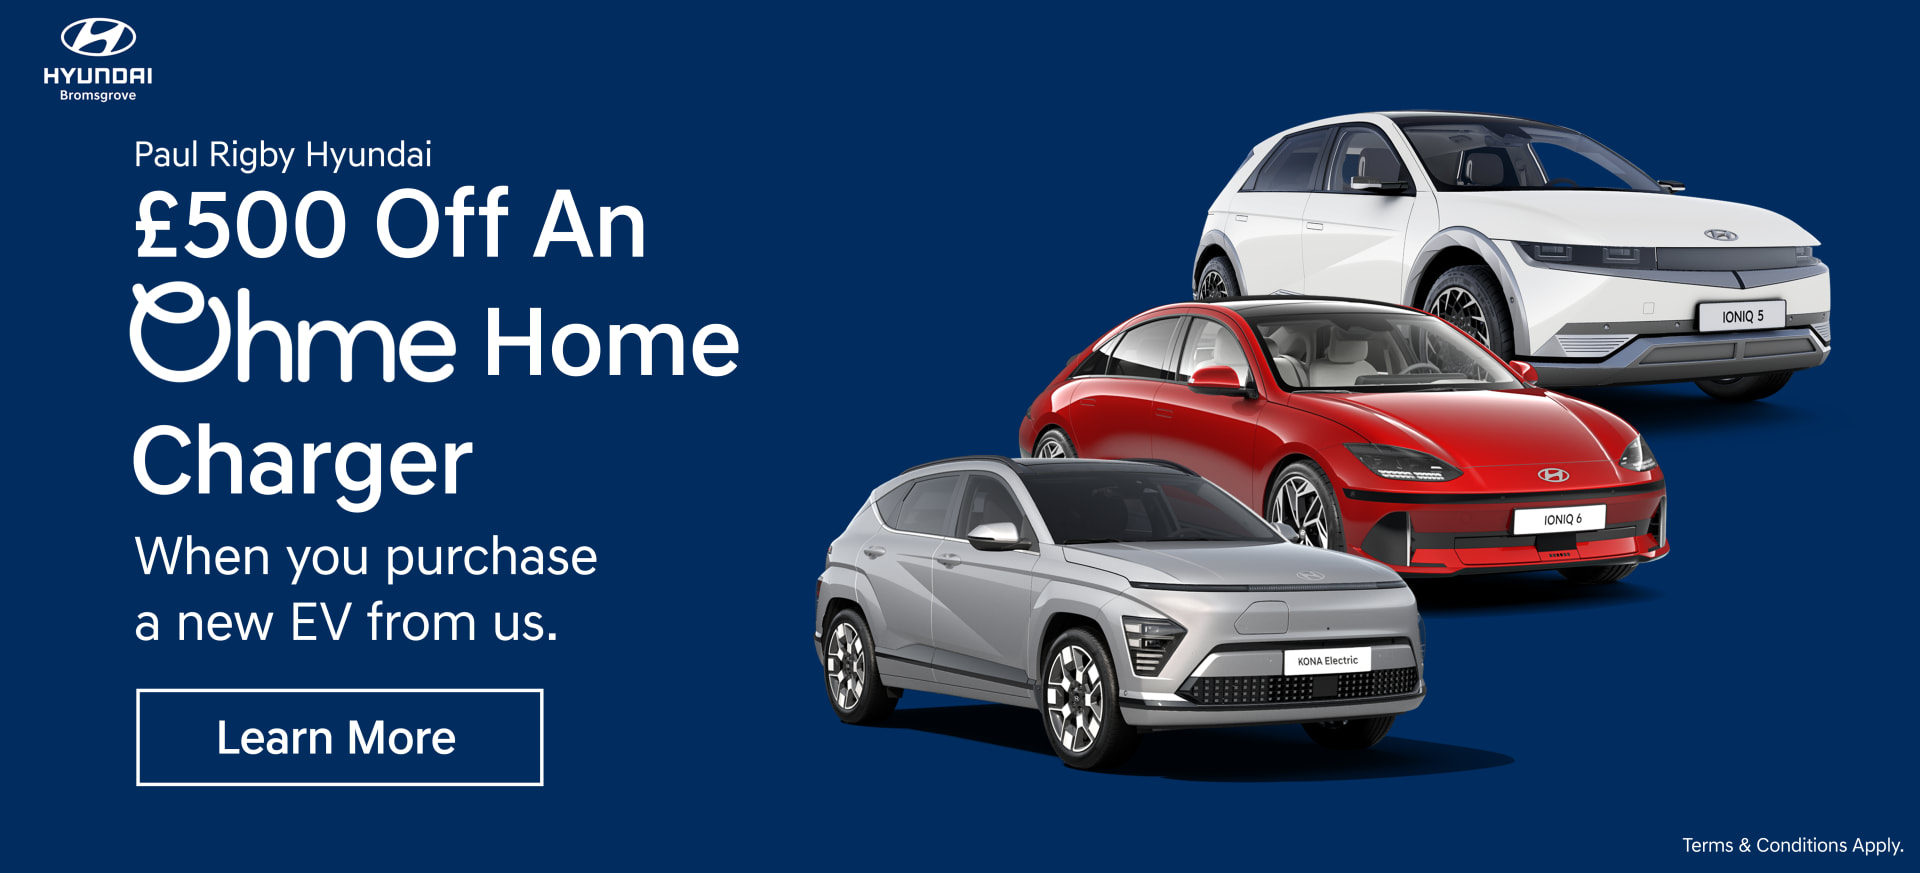 New EV & Ohme Home Charge Point Offer